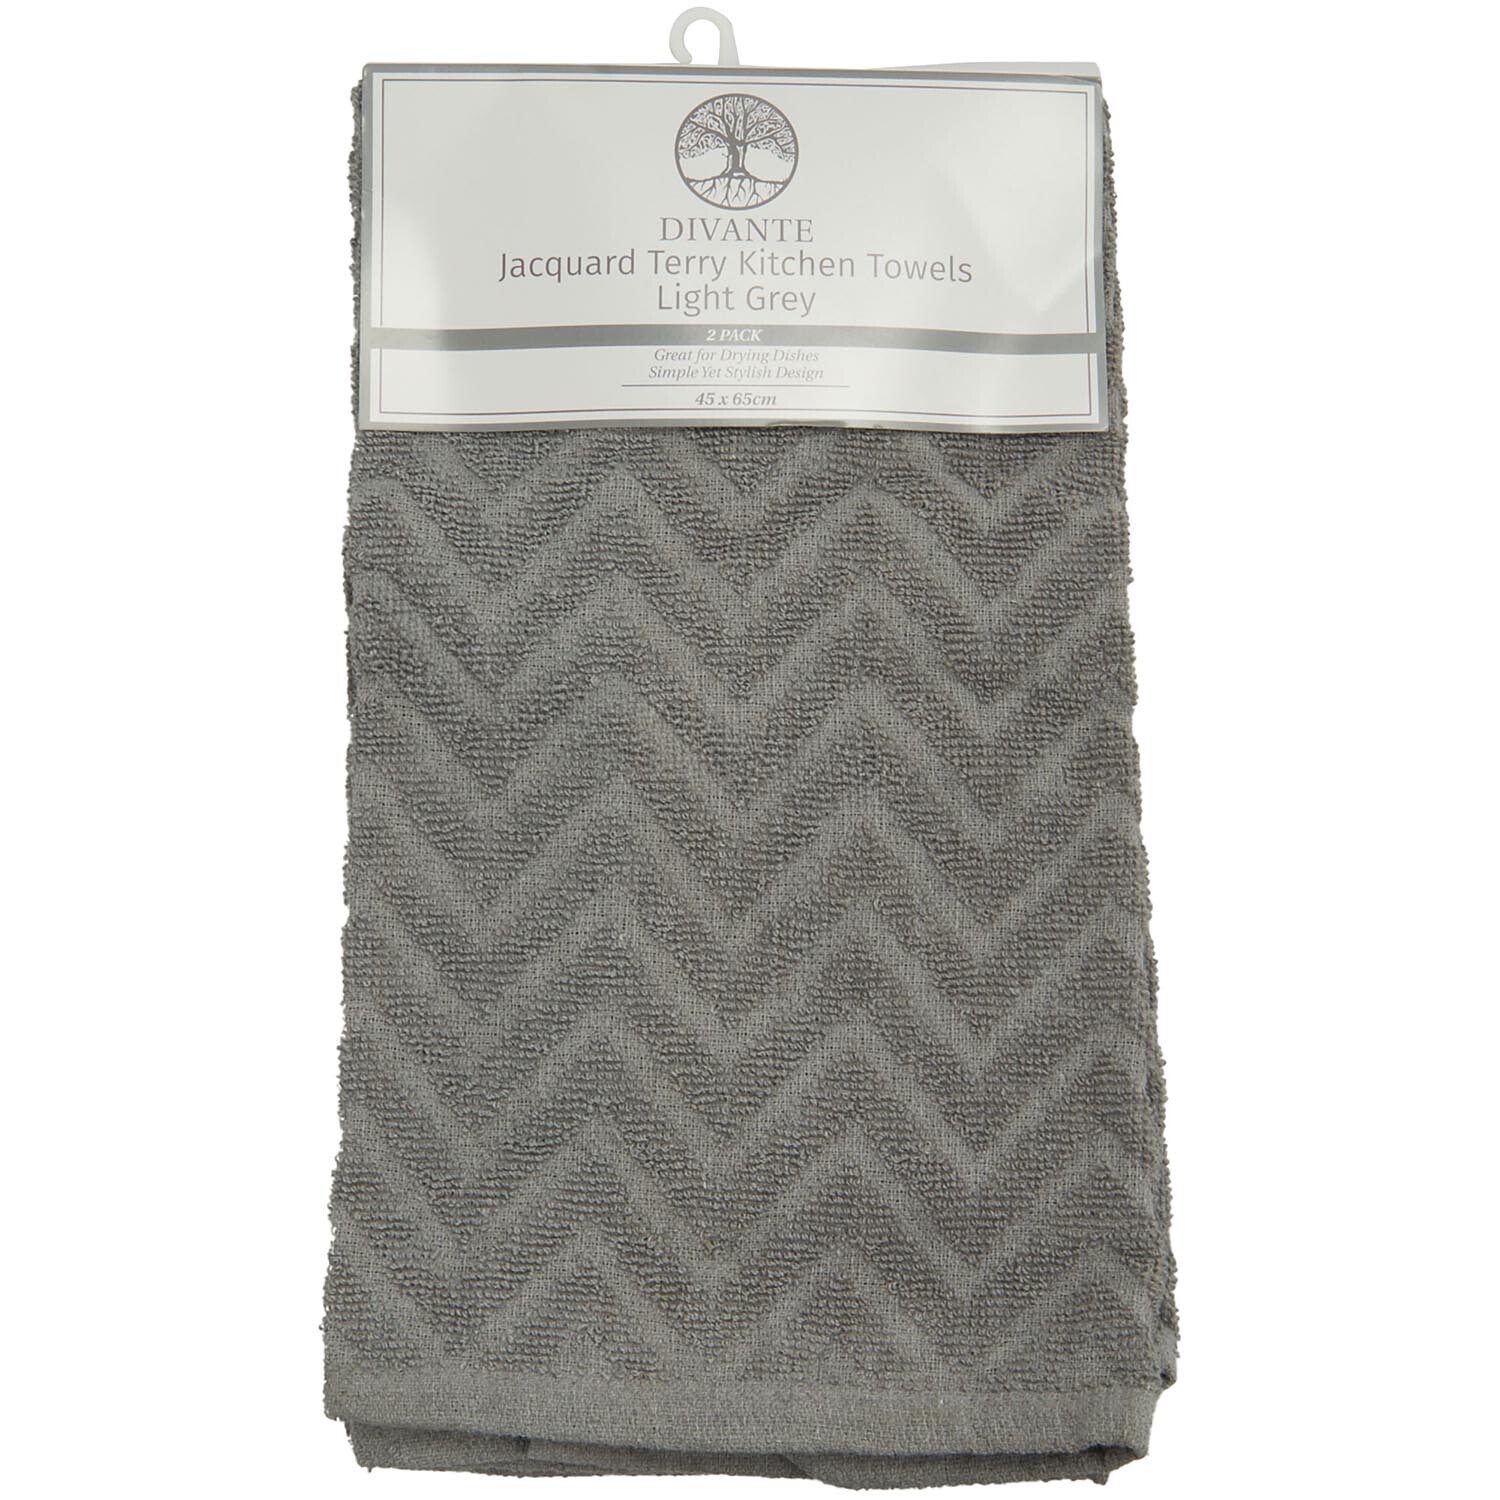 Pack of 2 Jacquard Terry Kitchen Towels - Light Grey Image 1